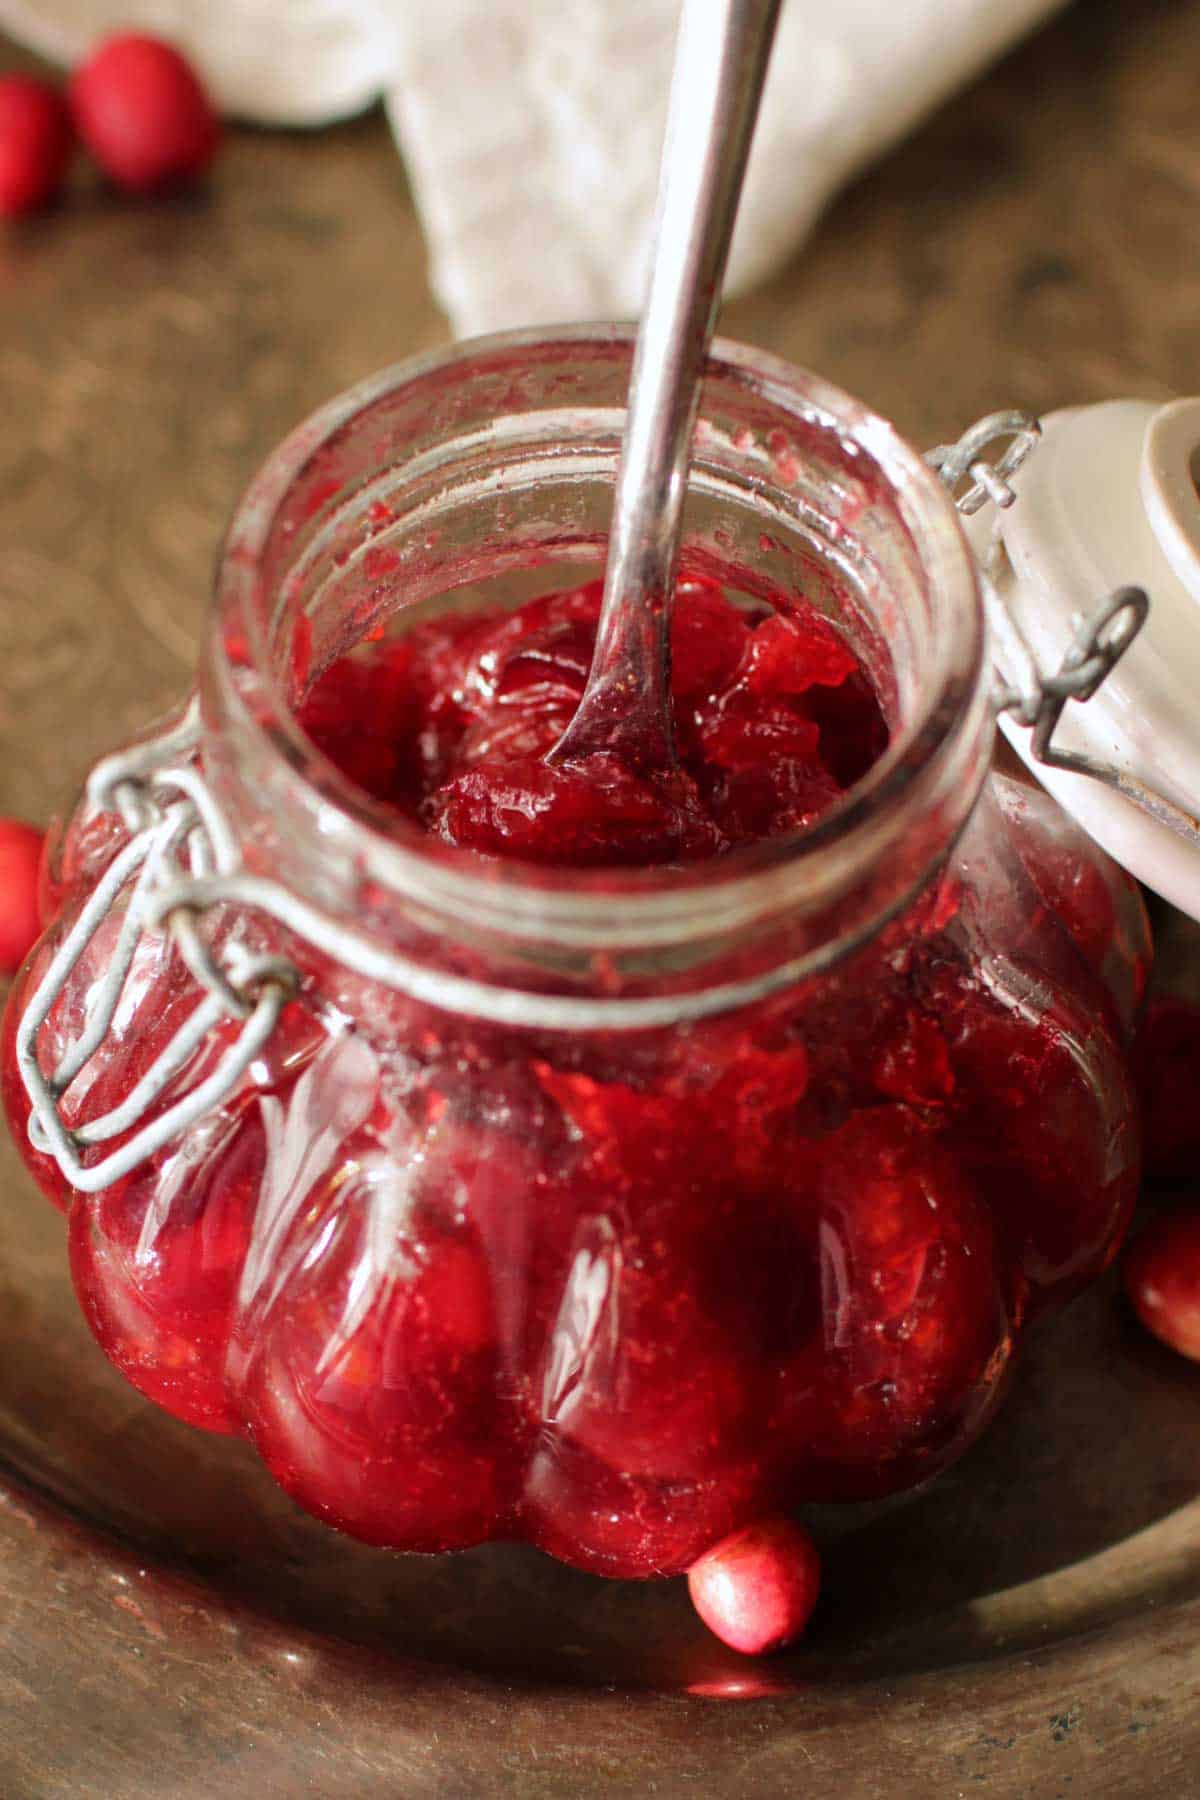 An closeup of a jar of cranberry jam with a spoon.